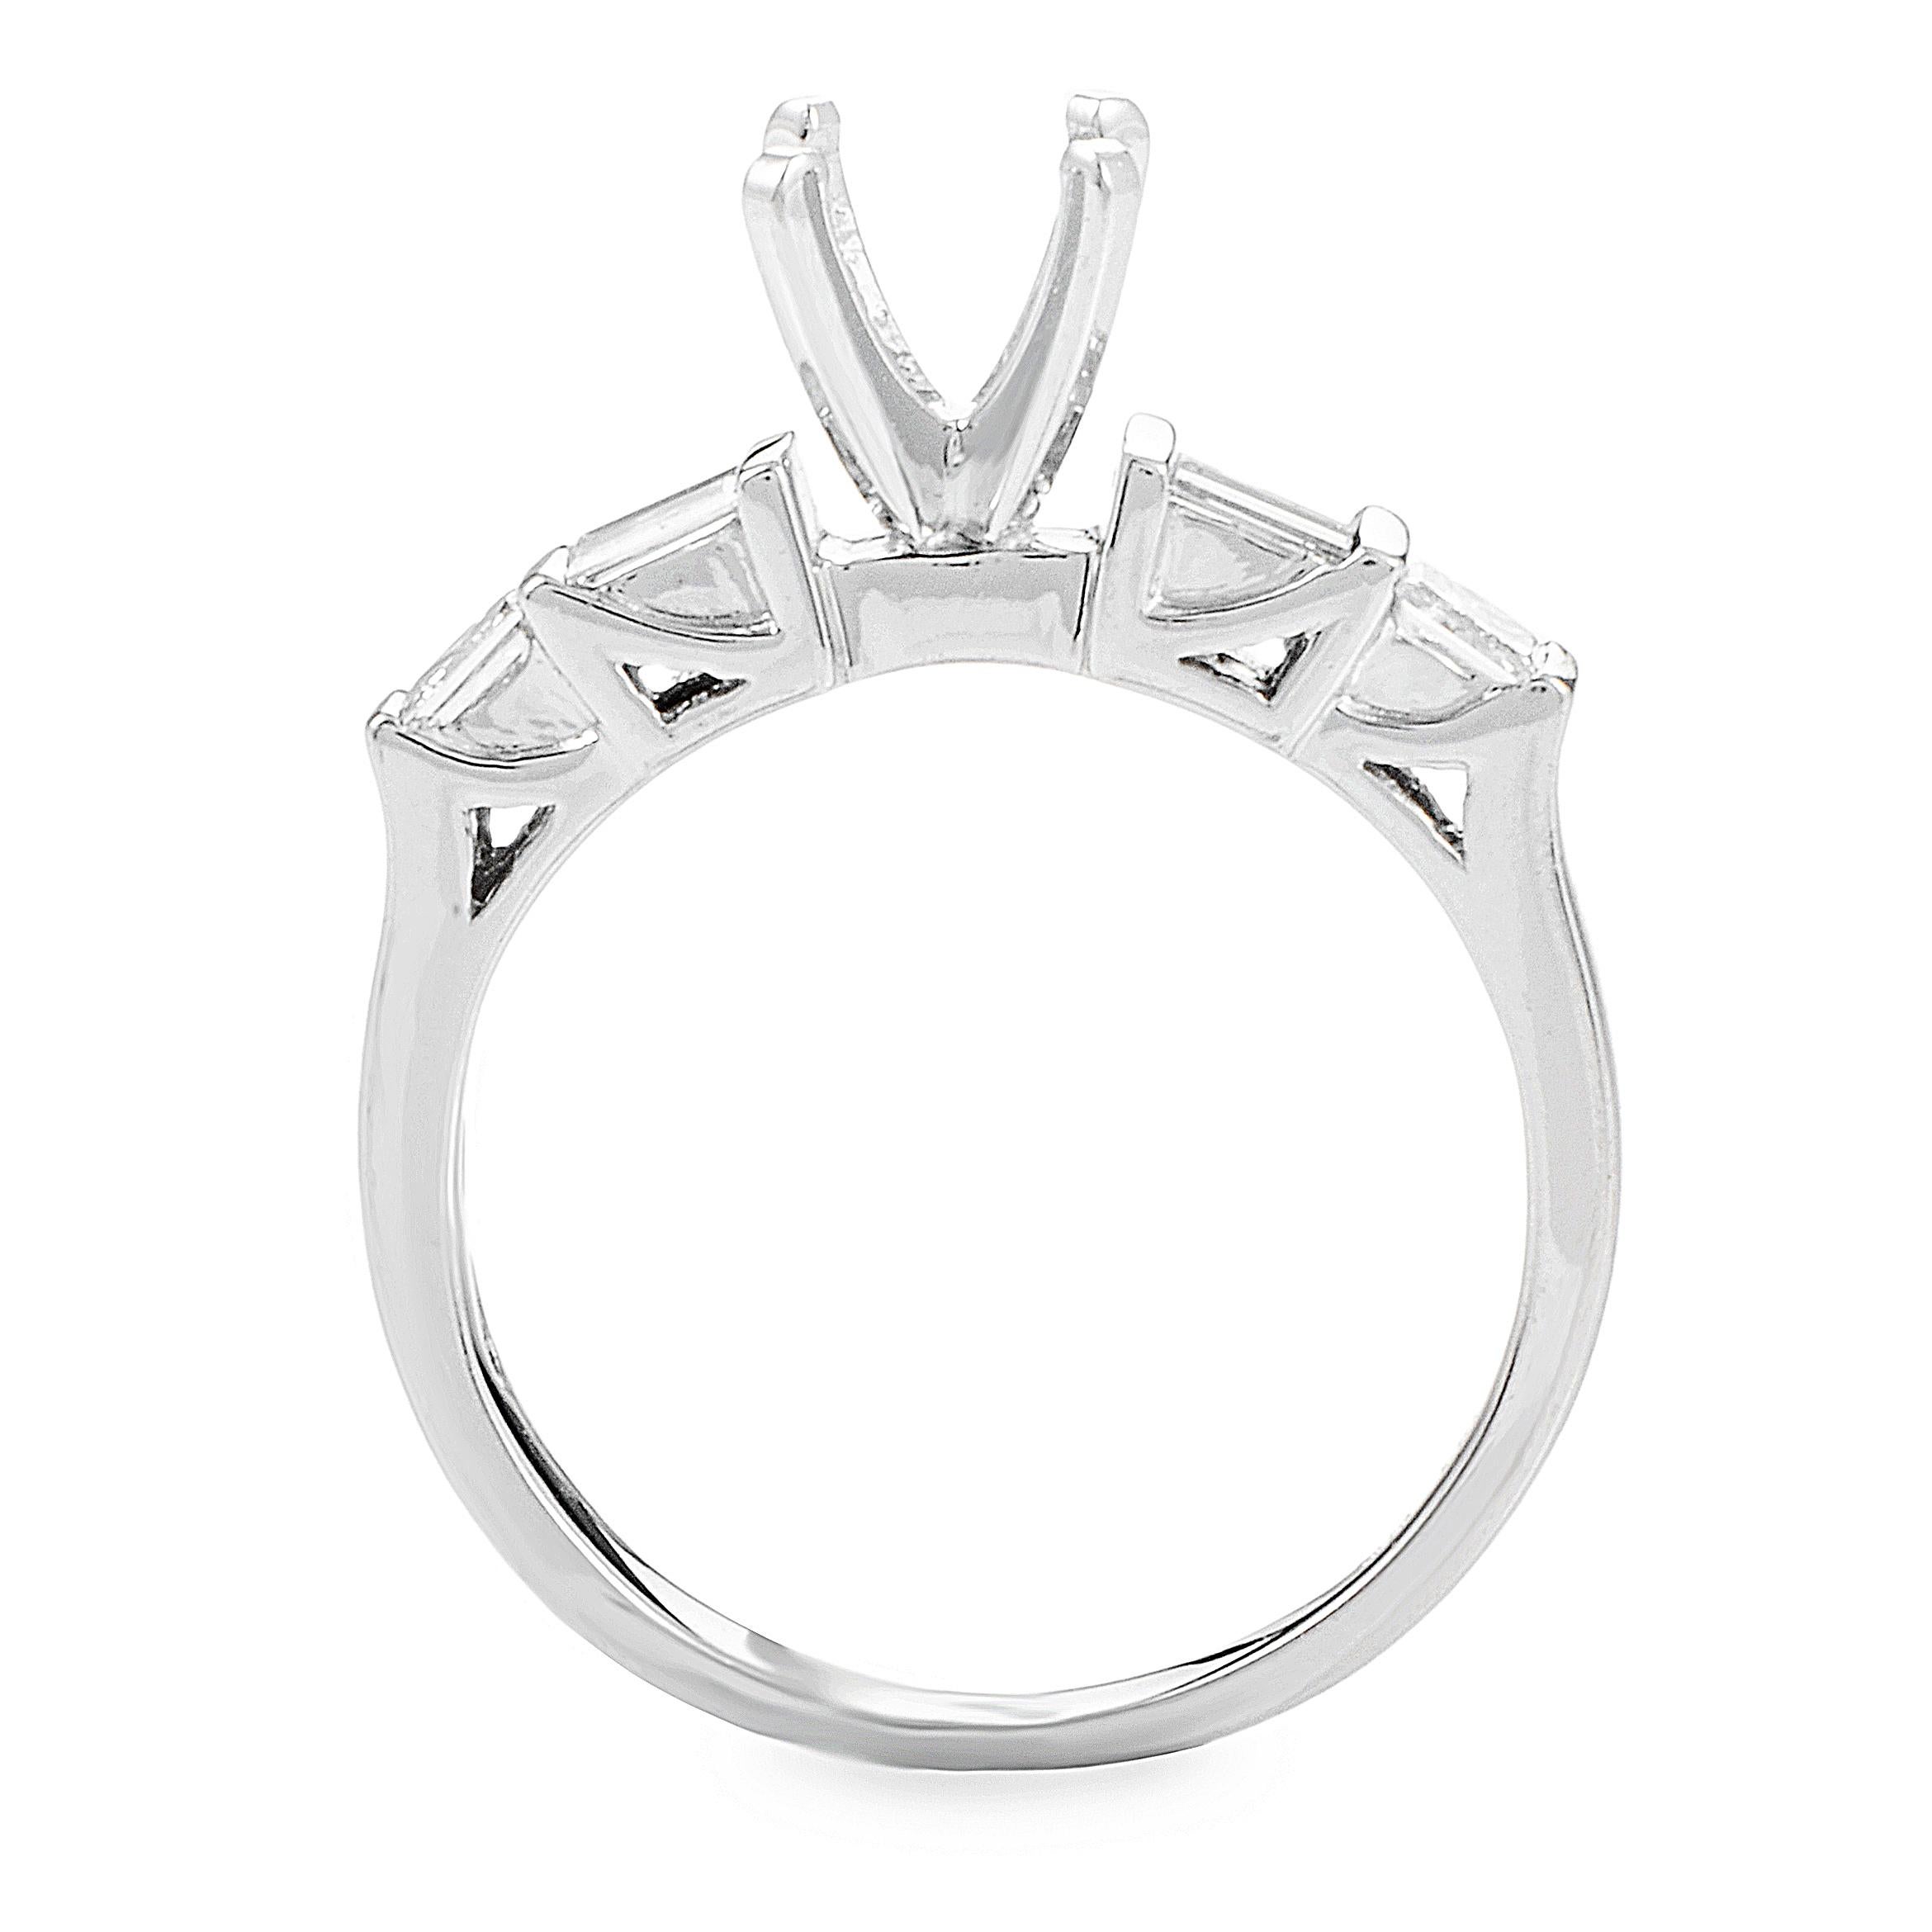 This Natalie K mounting ring is modern and chic. The ring is made of 18K white gold and features ~.48CT of diamonds.
